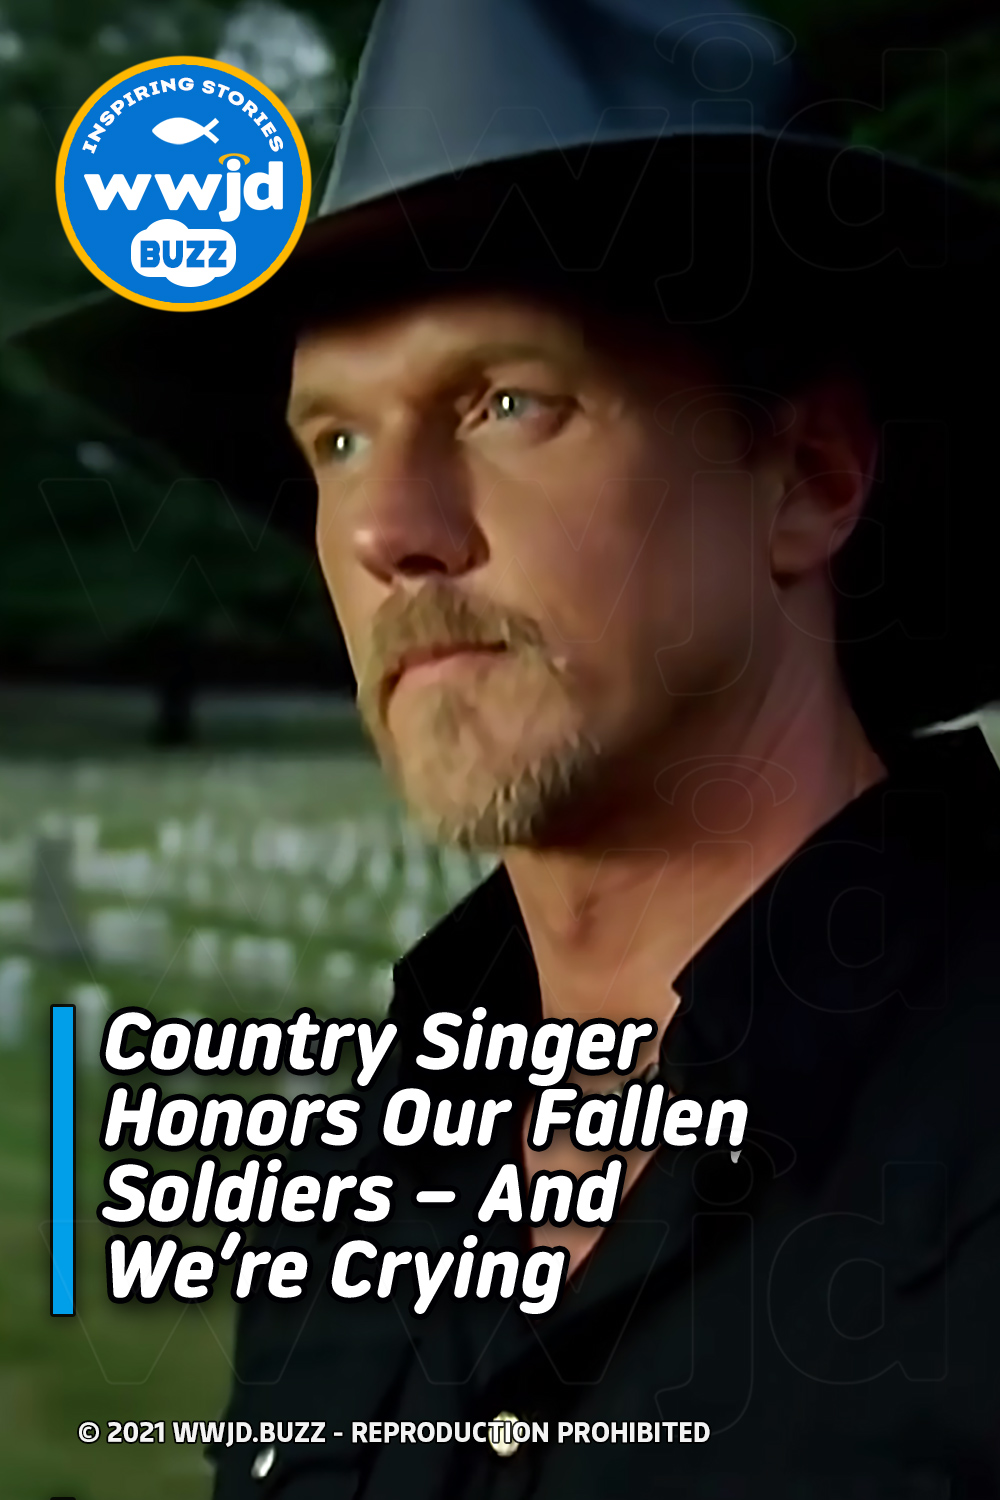 Country Singer Honors Our Fallen Soldiers - And We’re Crying